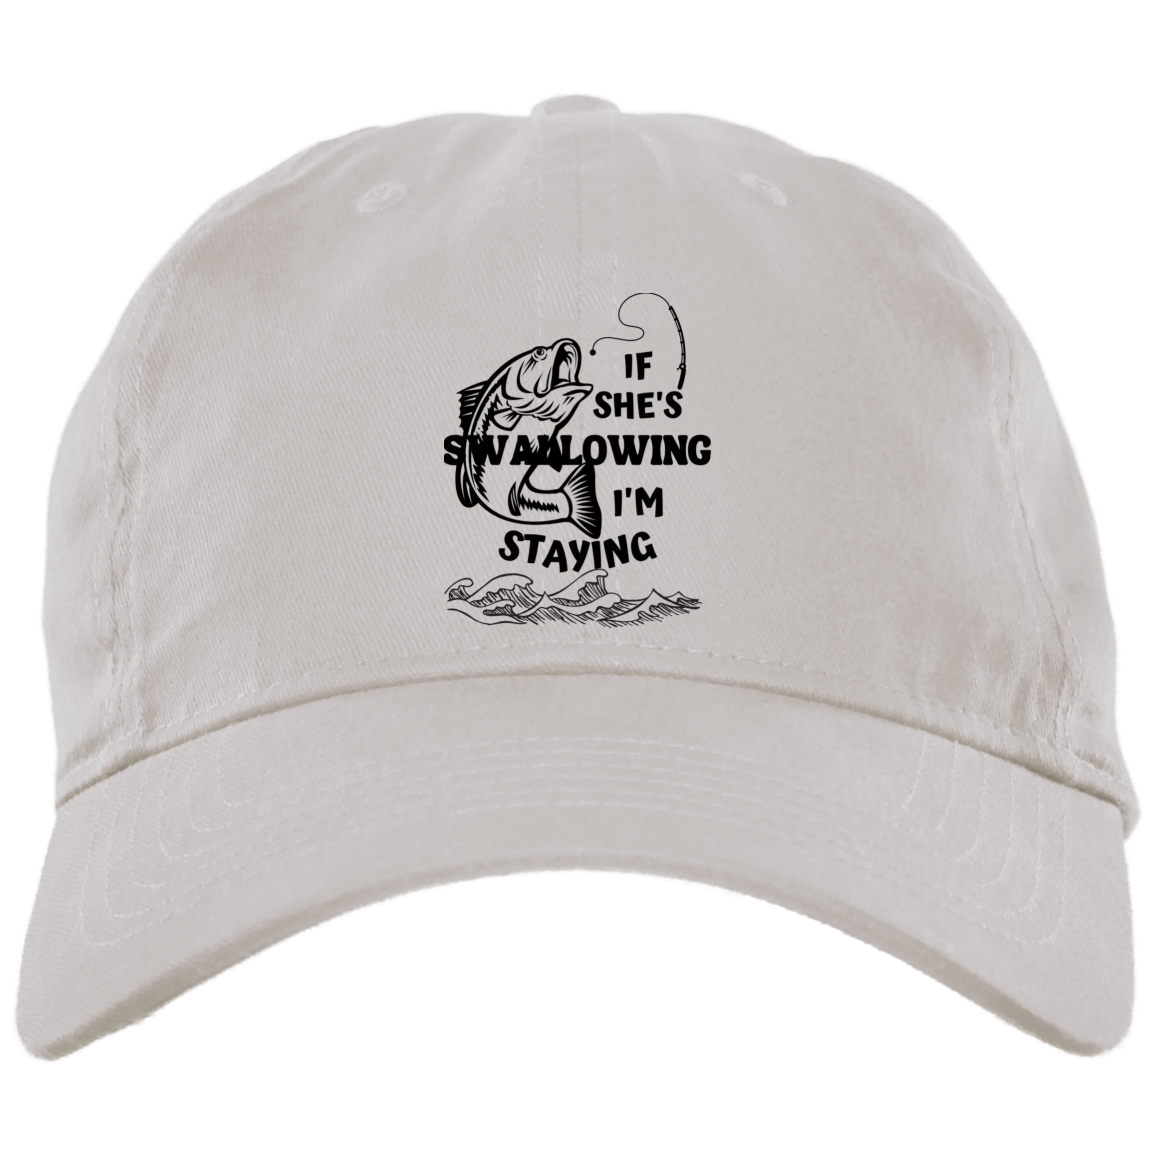 IF SHE'S SWALLOWING Embroidered Brushed Twill Unstructured Dad Cap